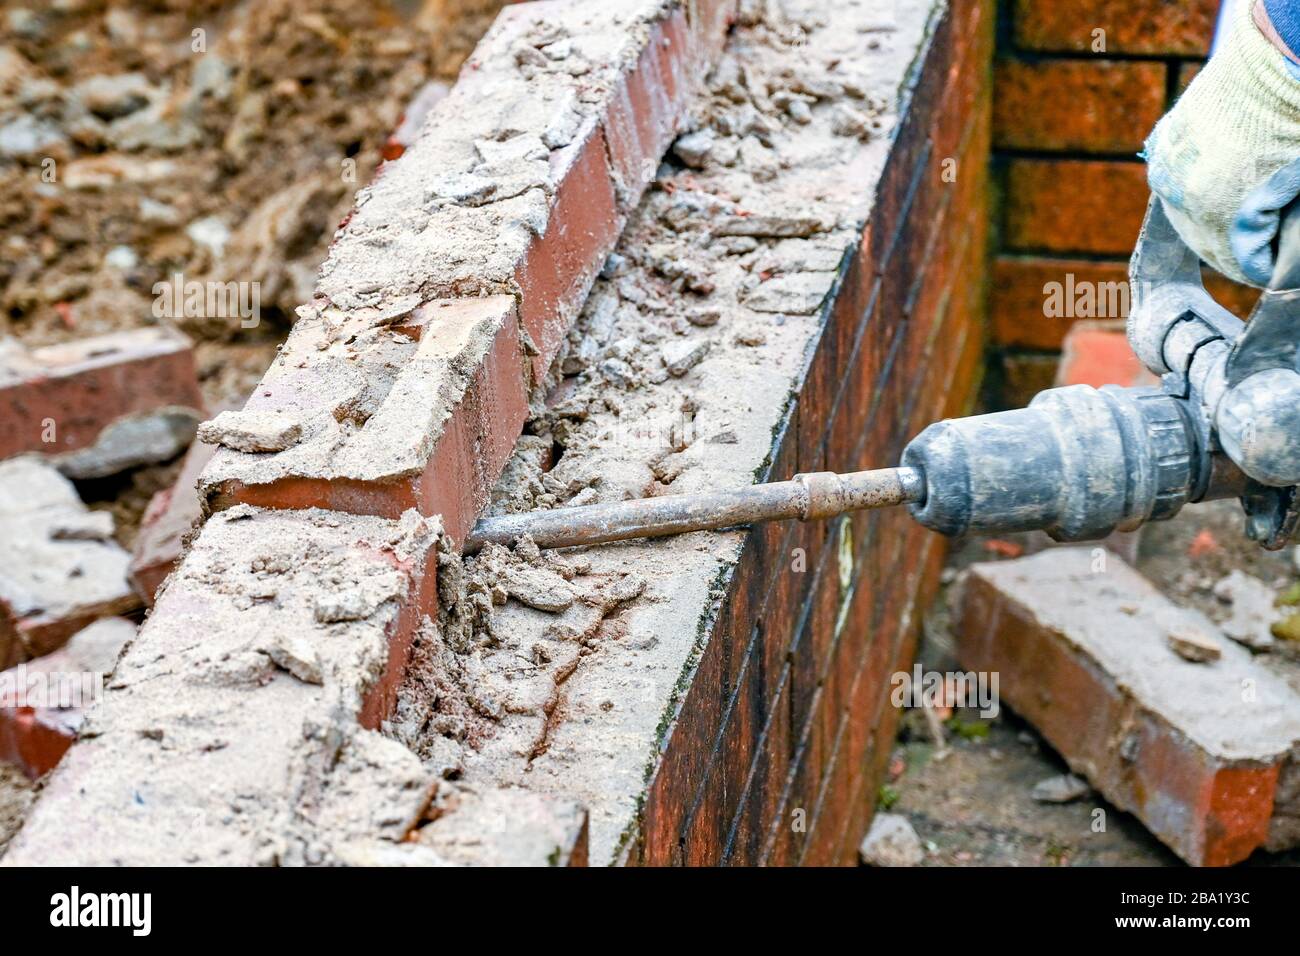 CARDIFF, WALES - JANUARY 2020: Worker using a power hammer to break up bricks in an old wall. Stock Photo